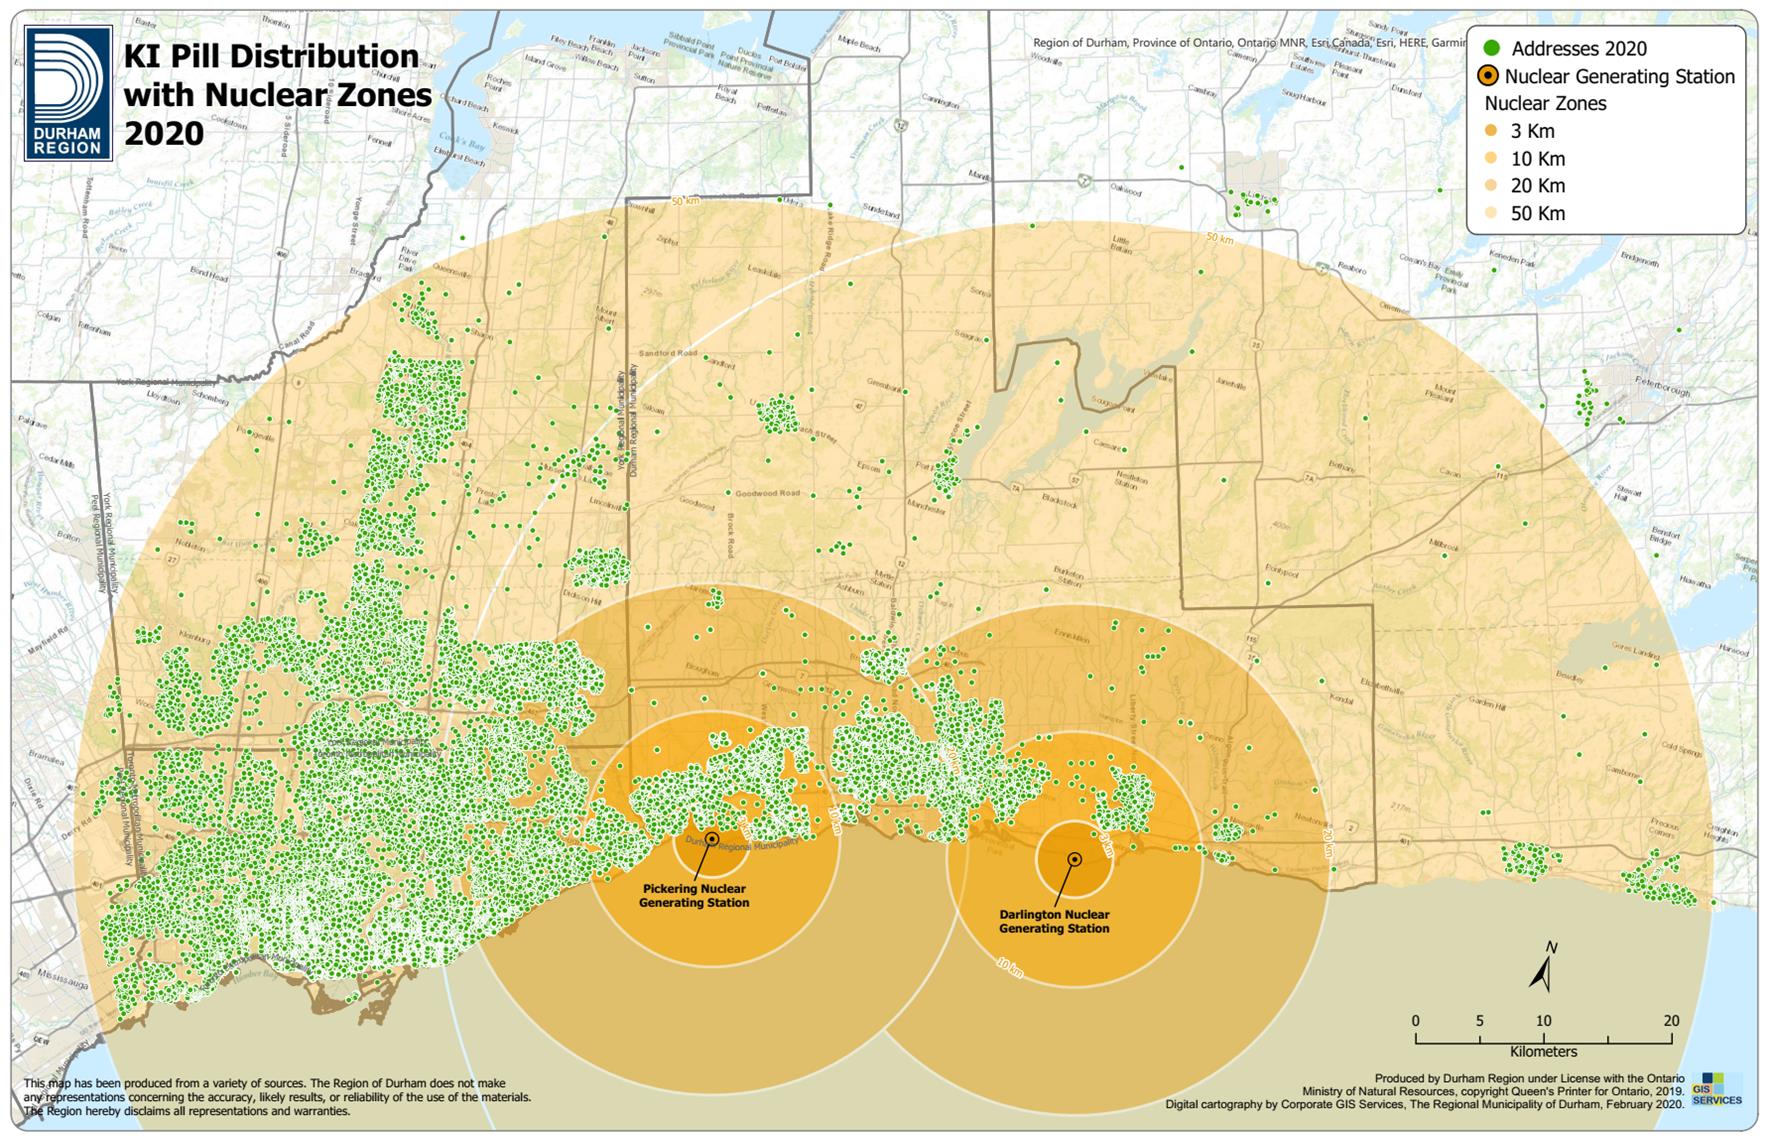 This graph shows the geographic distribution of KI orders distributed in January and February of 2020. These orders reach as far as 50km from the Pickering or Darlington Nuclear Power Plants.